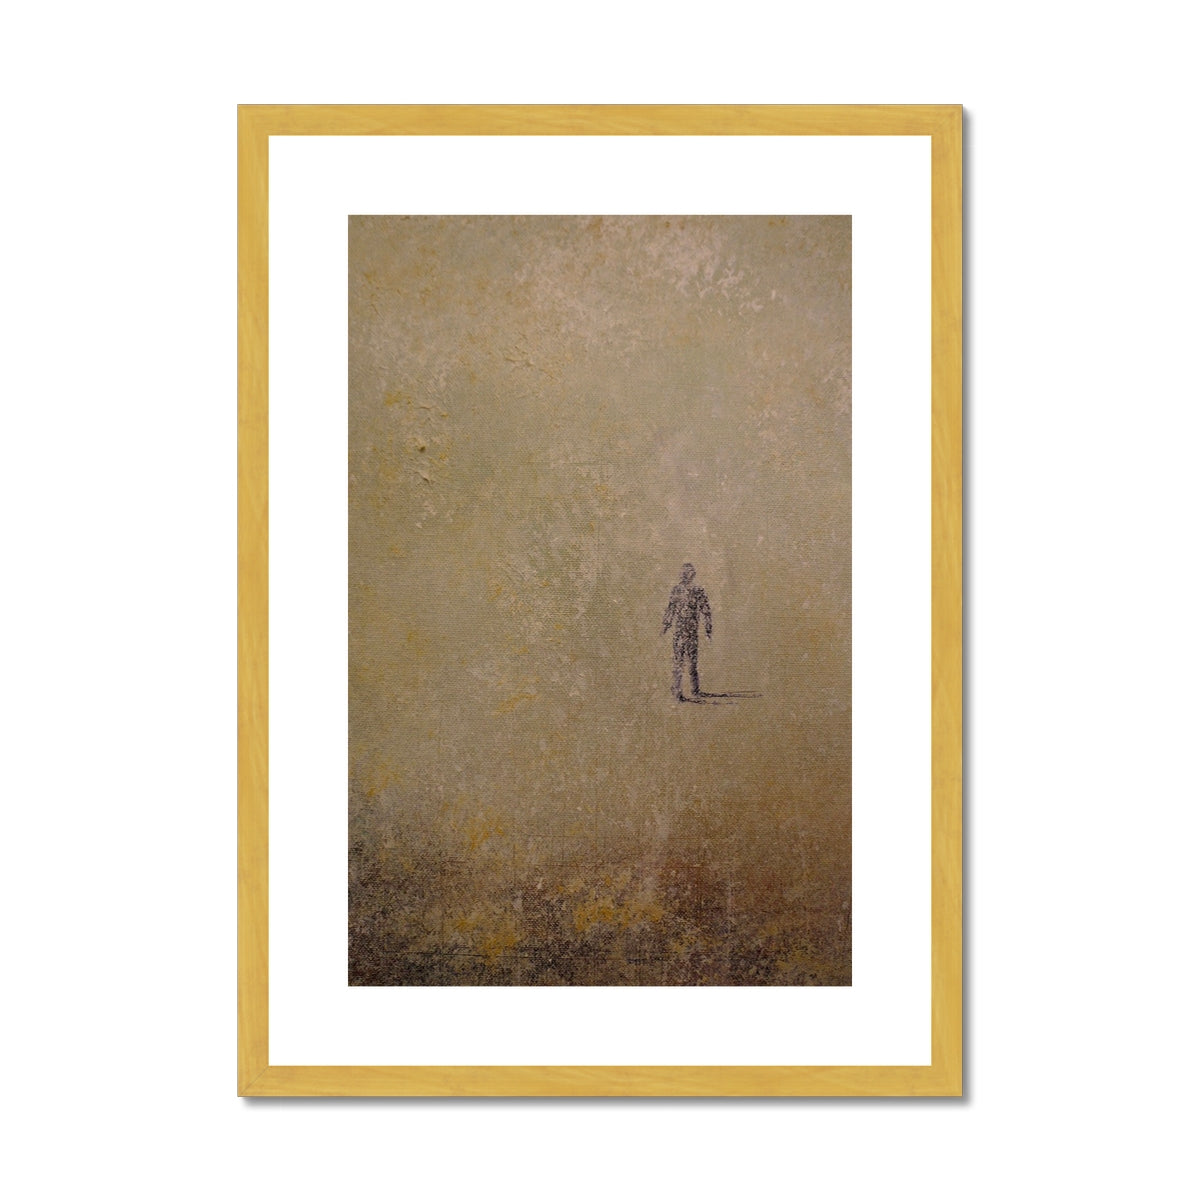 Into The Munro Mist Painting | Antique Framed & Mounted Prints From Scotland-Antique Framed & Mounted Prints-Abstract & Impressionistic Art Gallery-A2 Portrait-Gold Frame-Paintings, Prints, Homeware, Art Gifts From Scotland By Scottish Artist Kevin Hunter